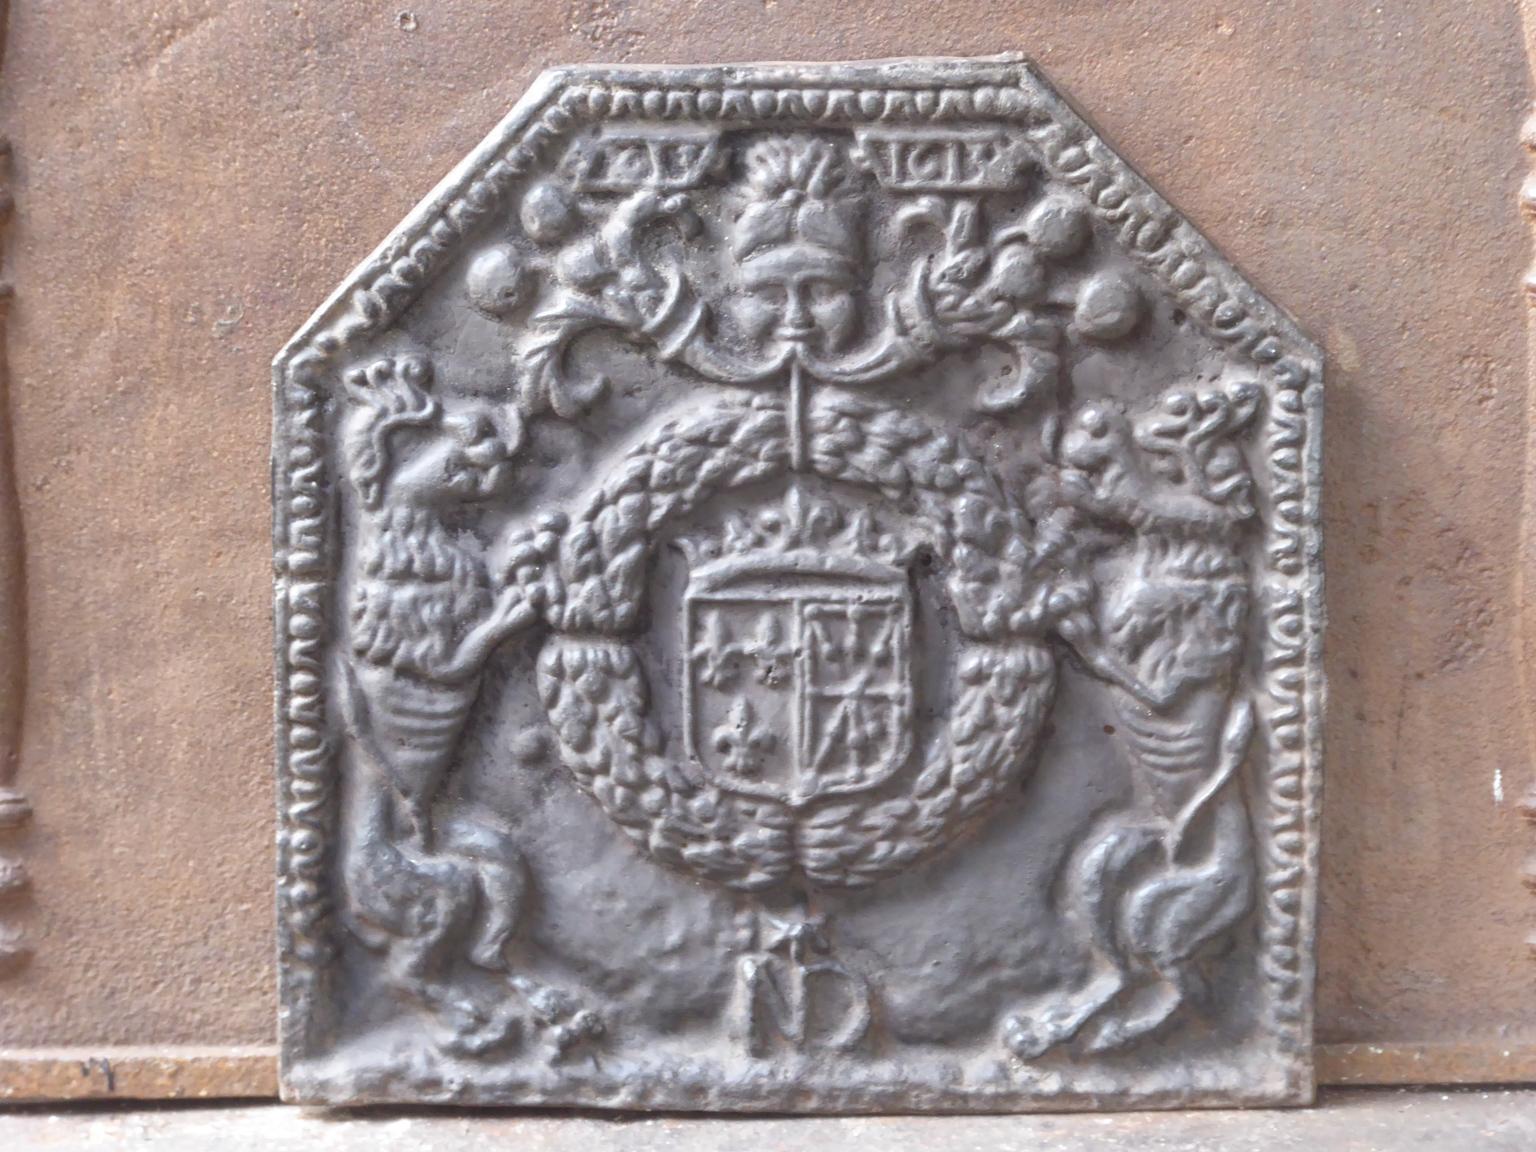 20th century French Louis III style fireback with the Arms of France and Navarre. 

Arms of the House of Bourbon from France, one of the major royal dynasties of Europe that produced monarchs Spain (Navarre), France, the two Sicilies and Parma.